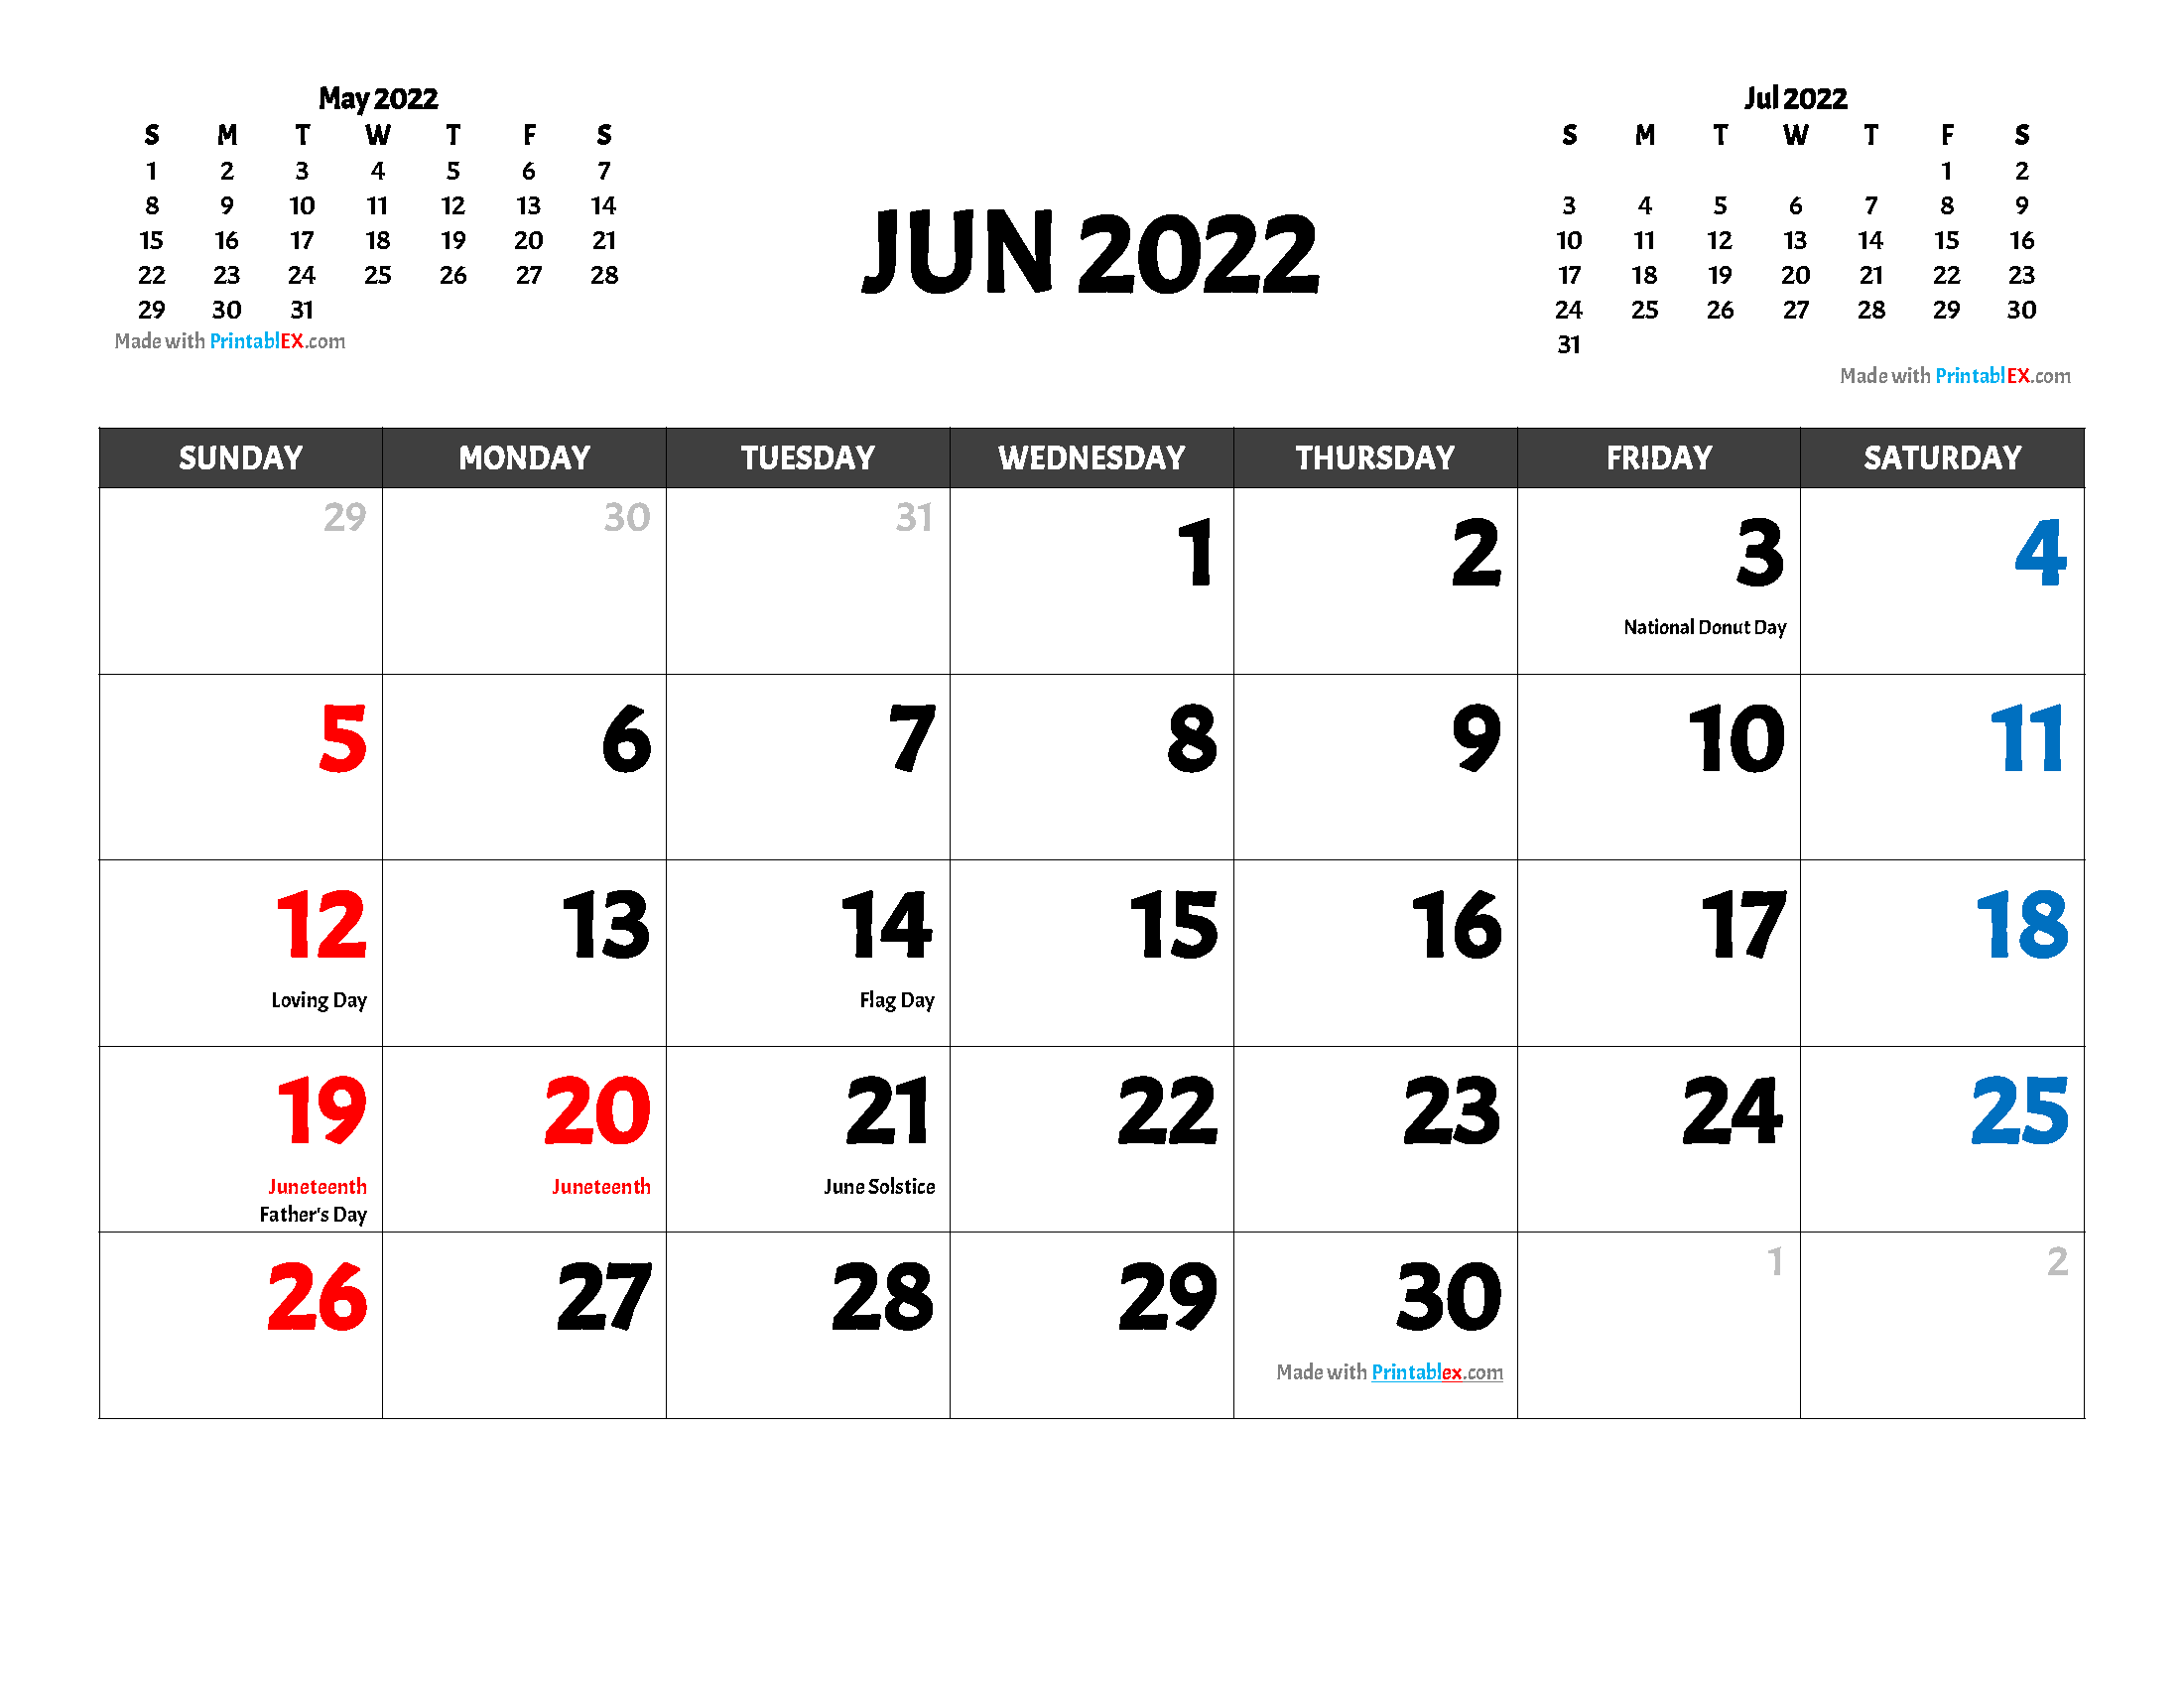 Free Printable June 2022 Calendar with holidays and observances in United States